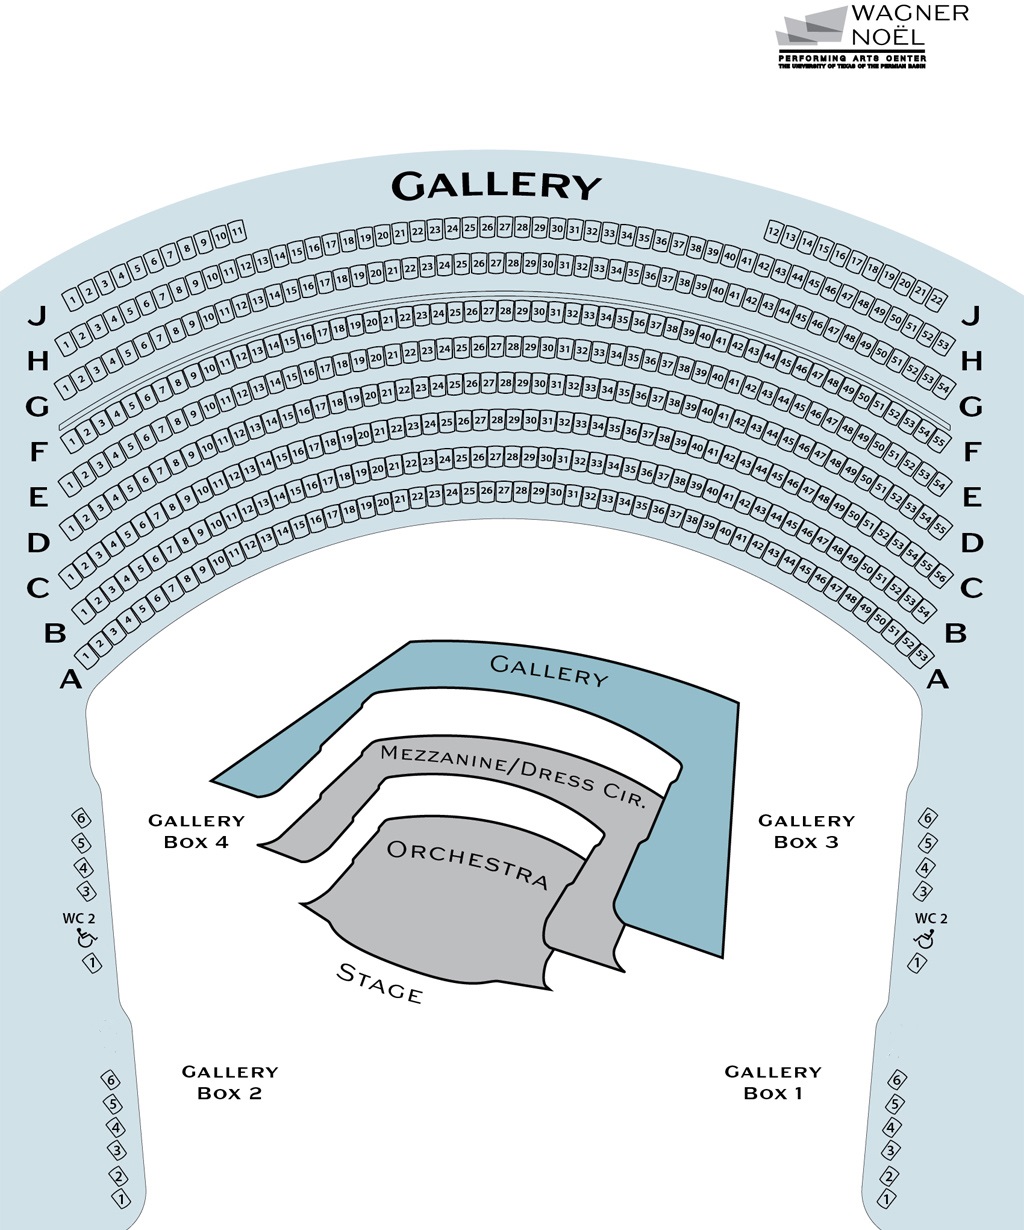 Seating Charts | Wagner Noël